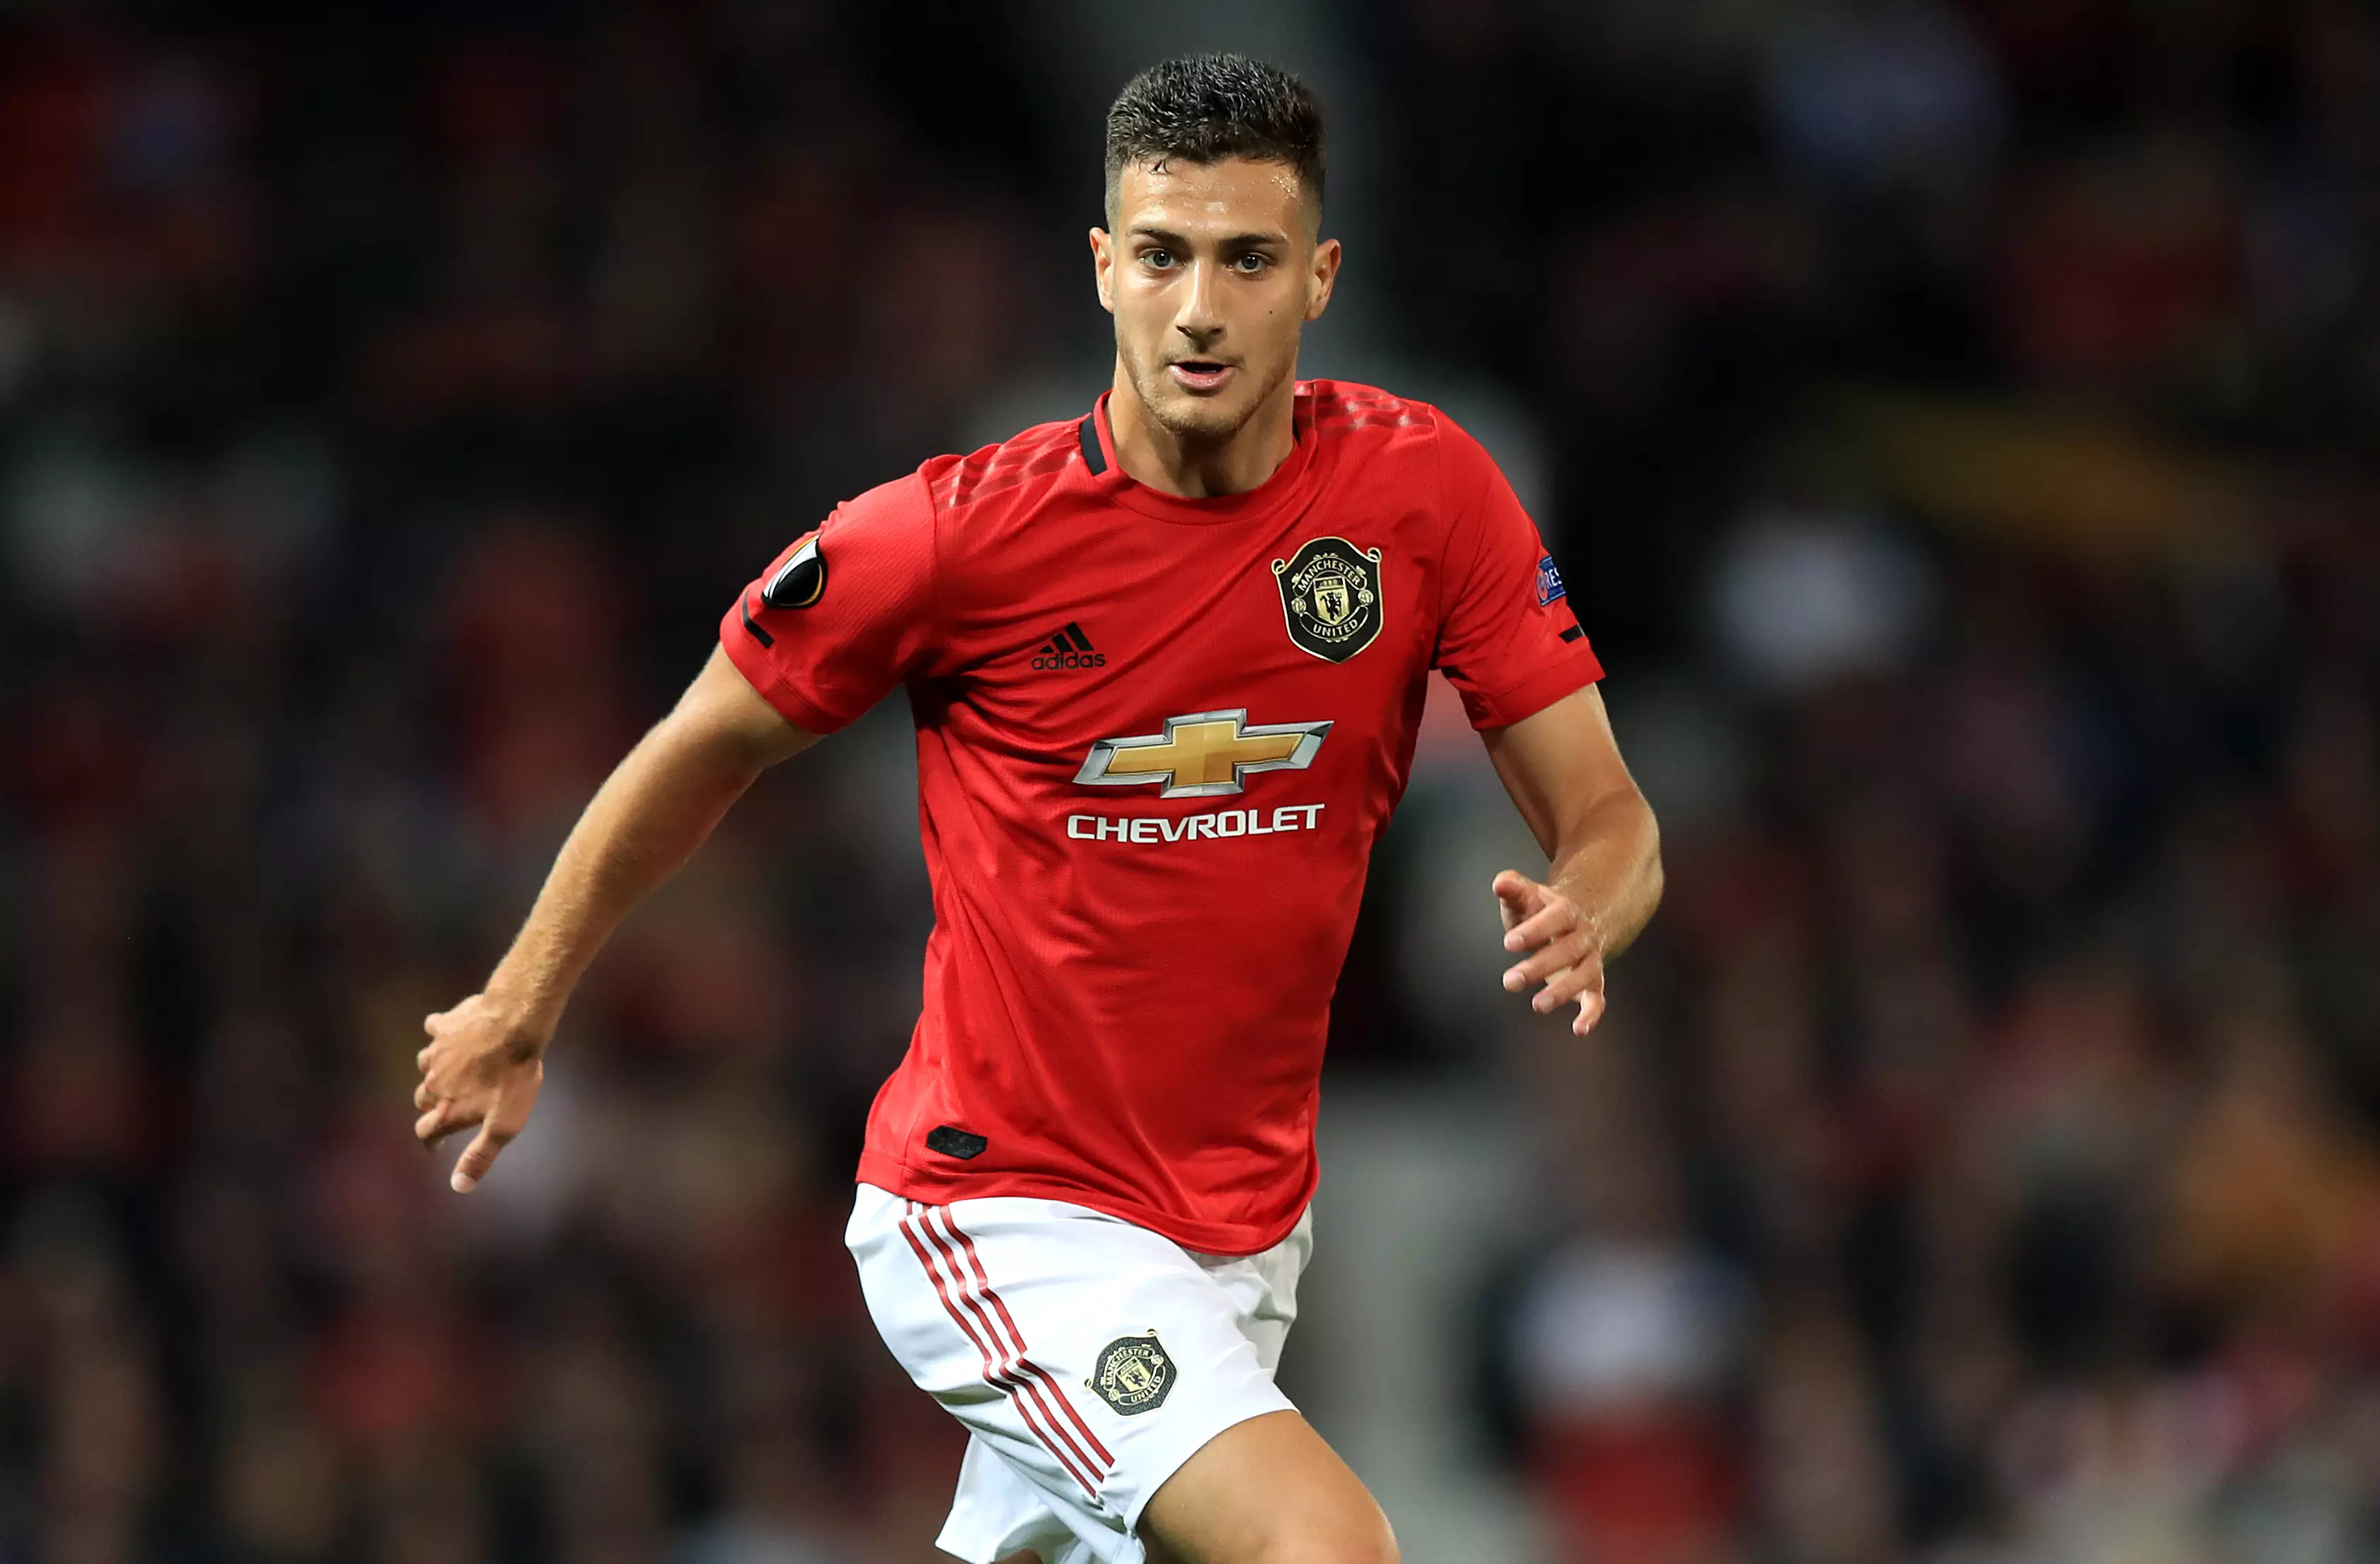 Dalot hasn't had much opportunity to prove himself at Manchester United. Image: PA Images